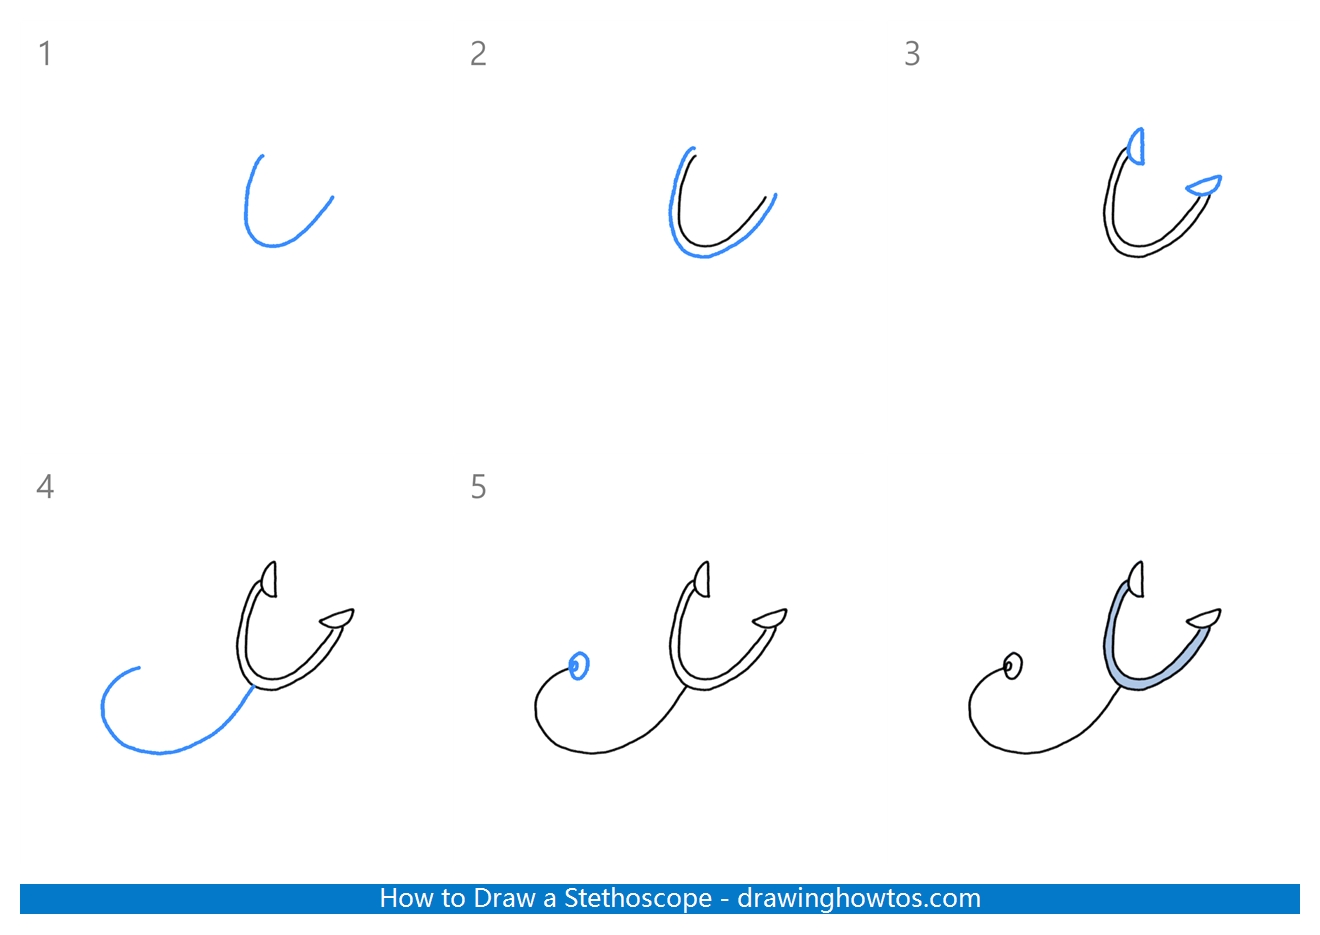 How to Draw a Stethoscope Step by Step